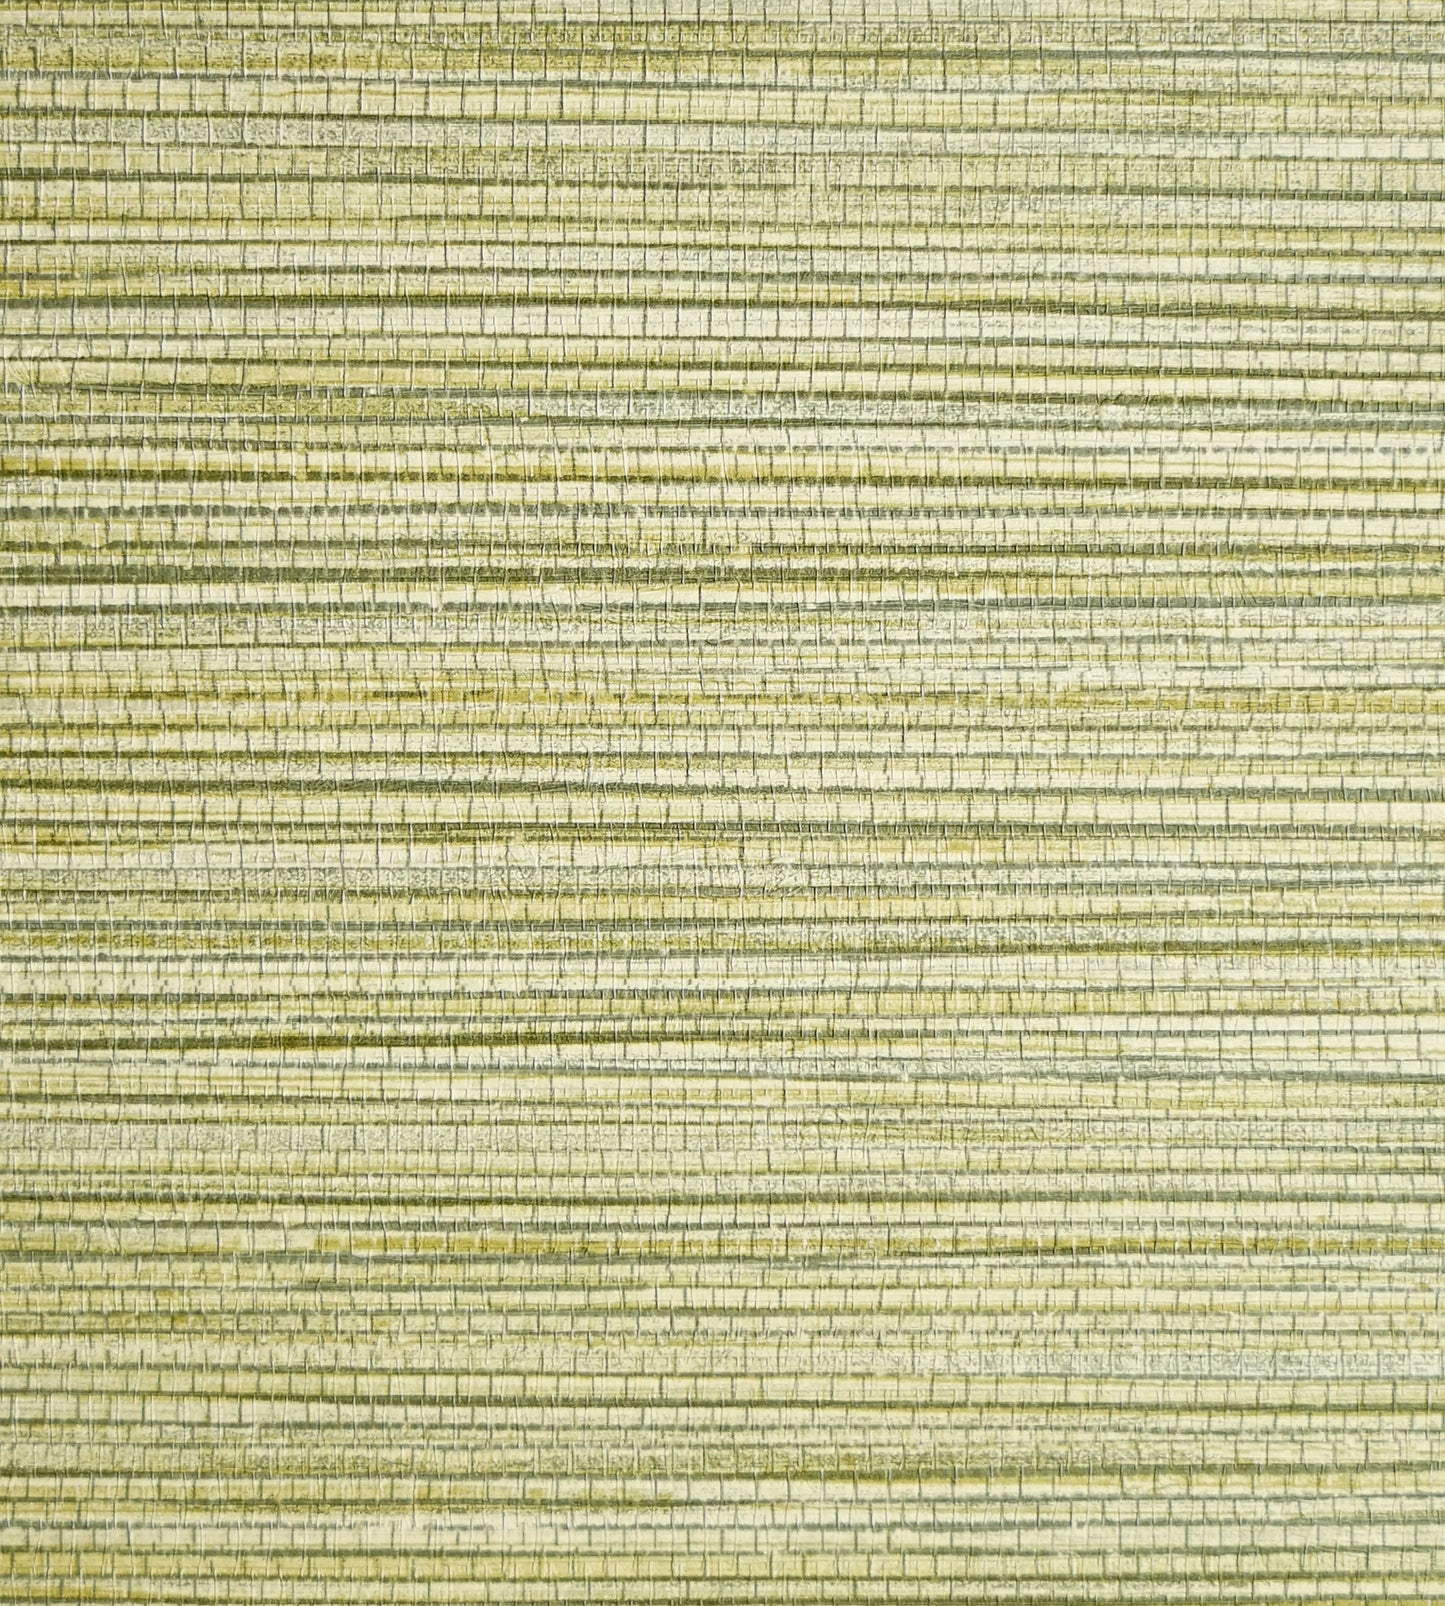 Find Scalamandre Wallpaper Pattern Sc 0004Wp88441 Name Willow Weave Grass Texture Wallpaper